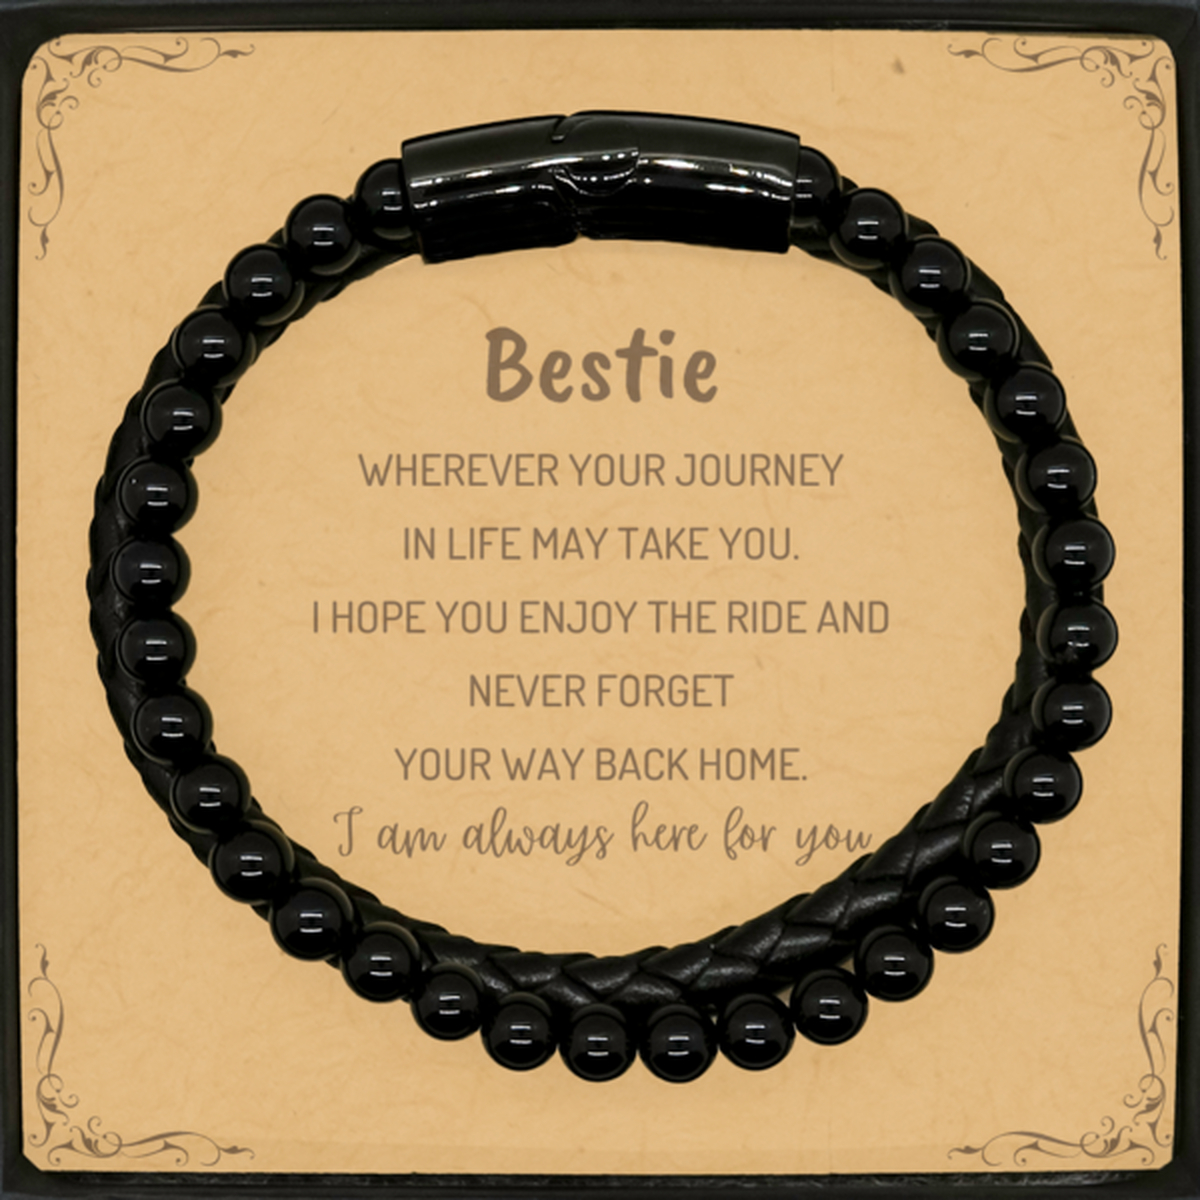 Bestie wherever your journey in life may take you, I am always here for you Bestie Stone Leather Bracelets, Awesome Christmas Gifts For Bestie Message Card, Bestie Birthday Gifts for Men Women Family Loved One